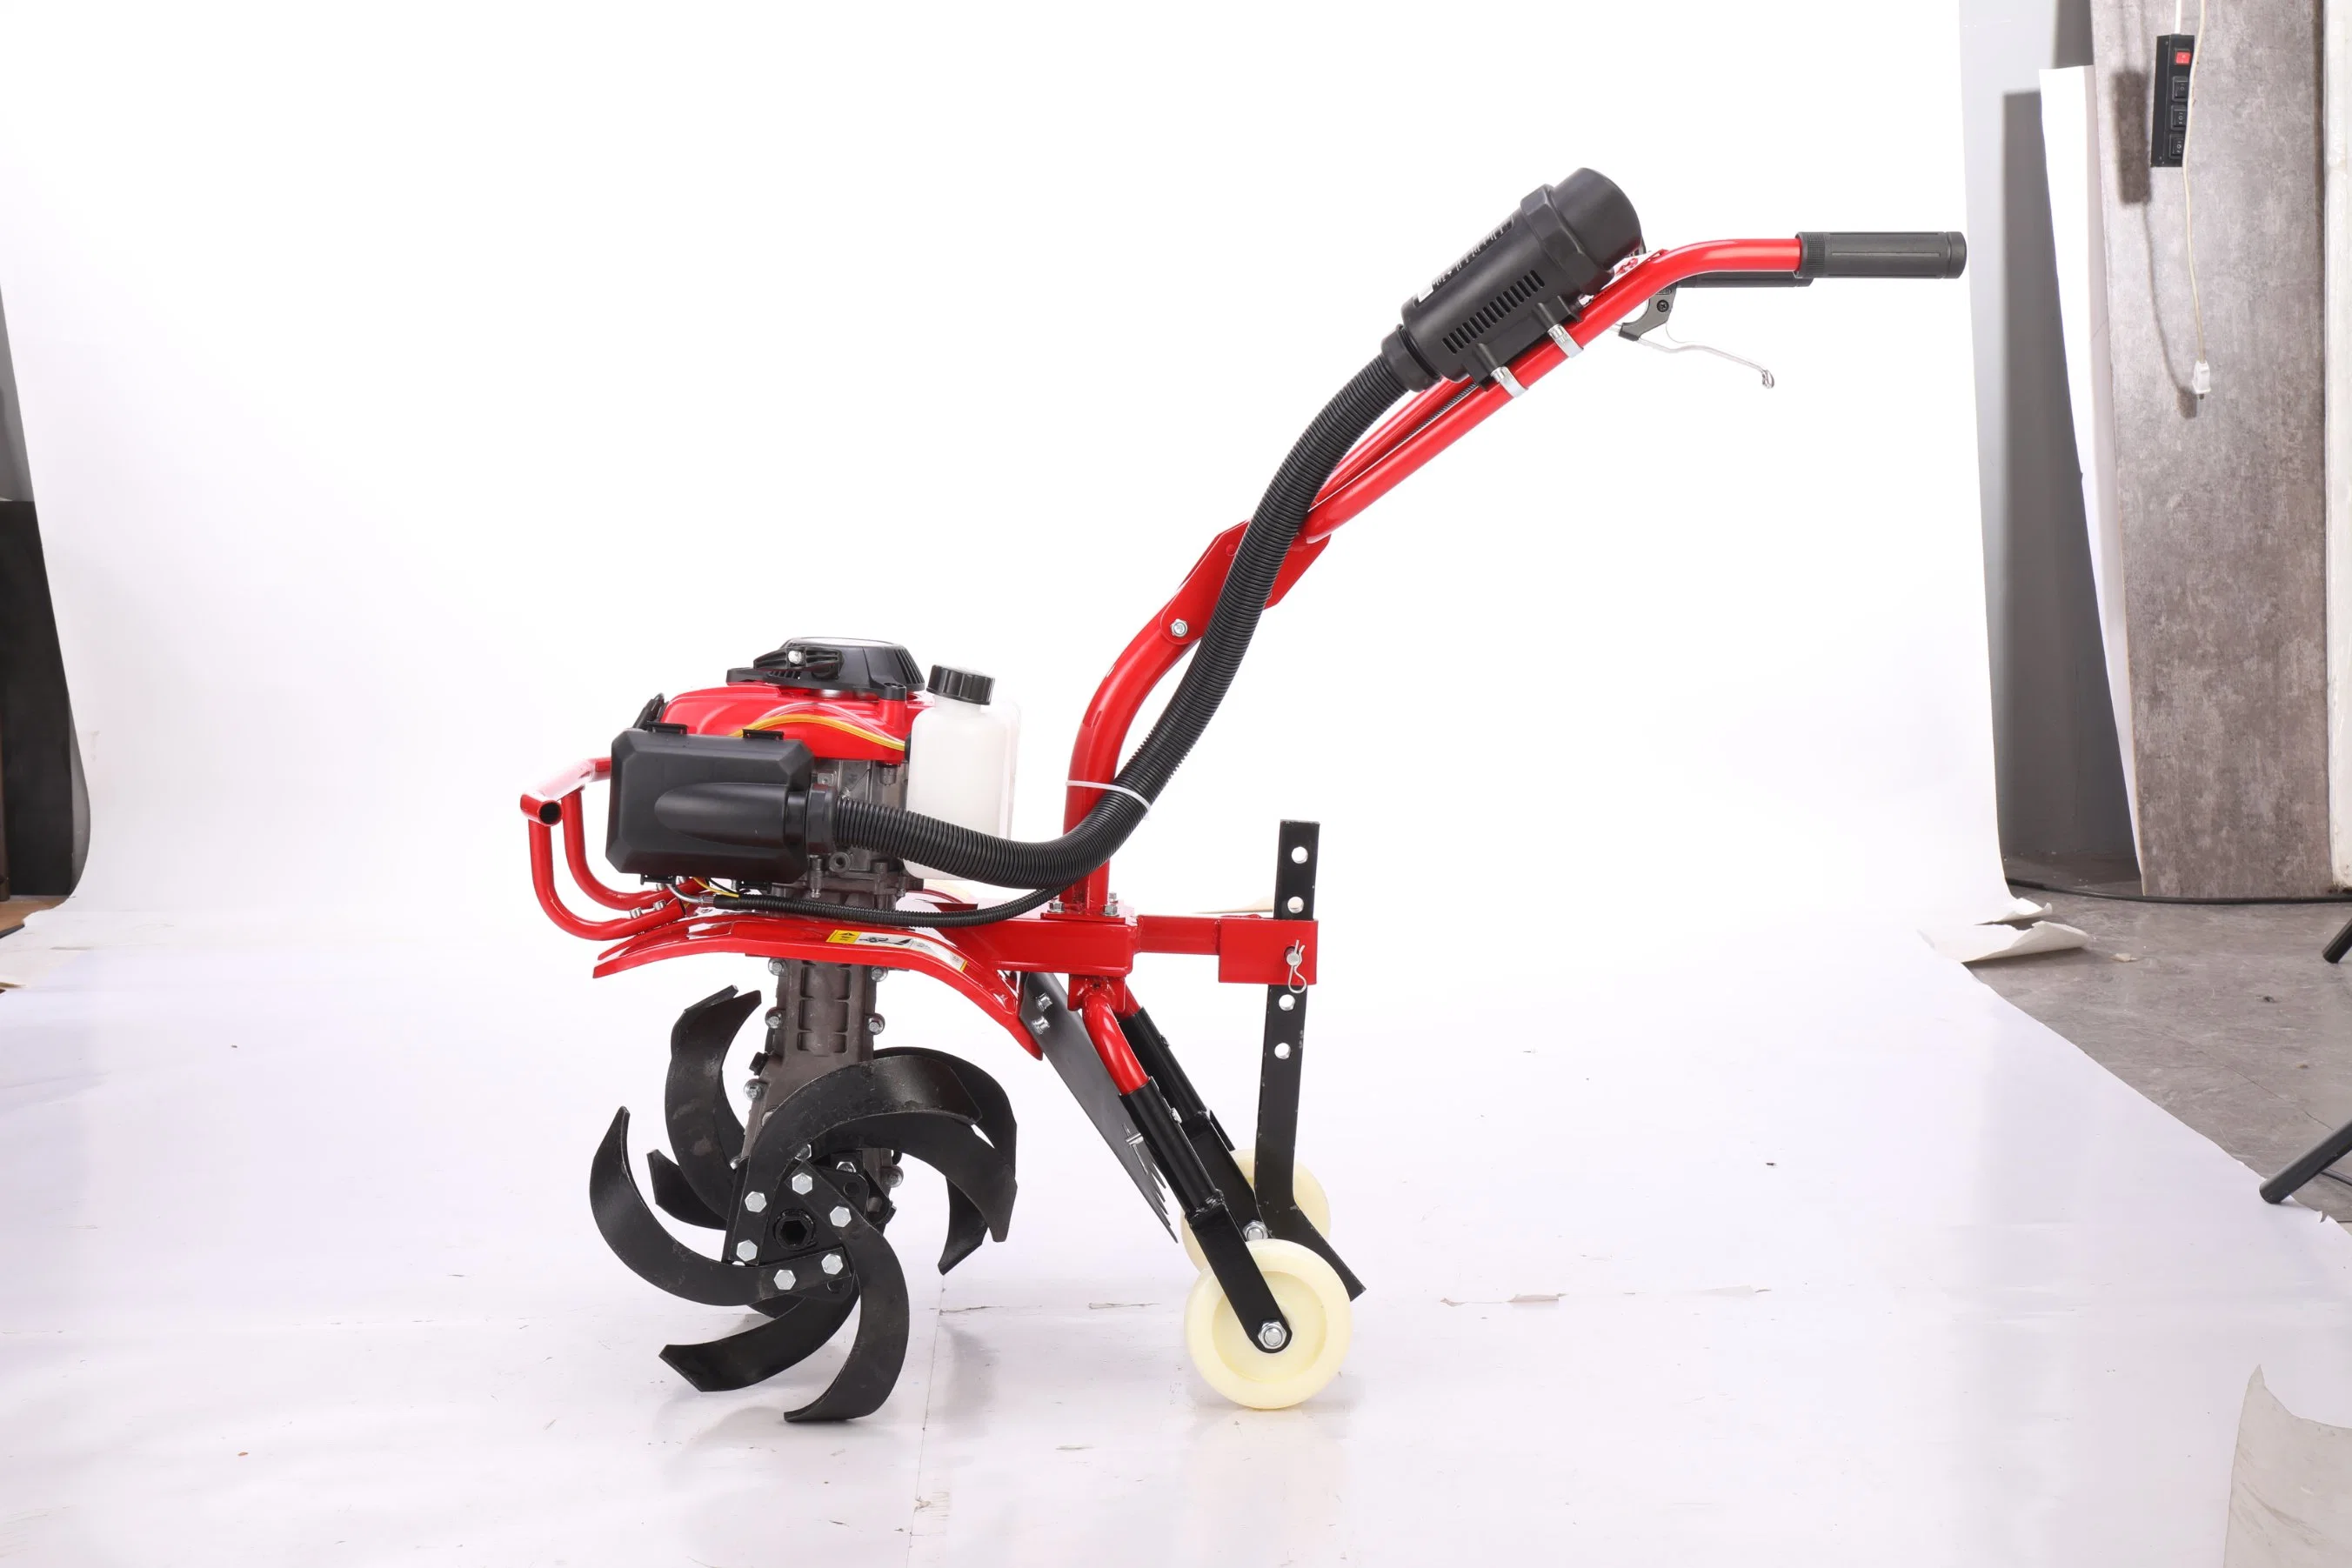 Chinese factory agriculture machinery tiller 63cc gasoline power tiller